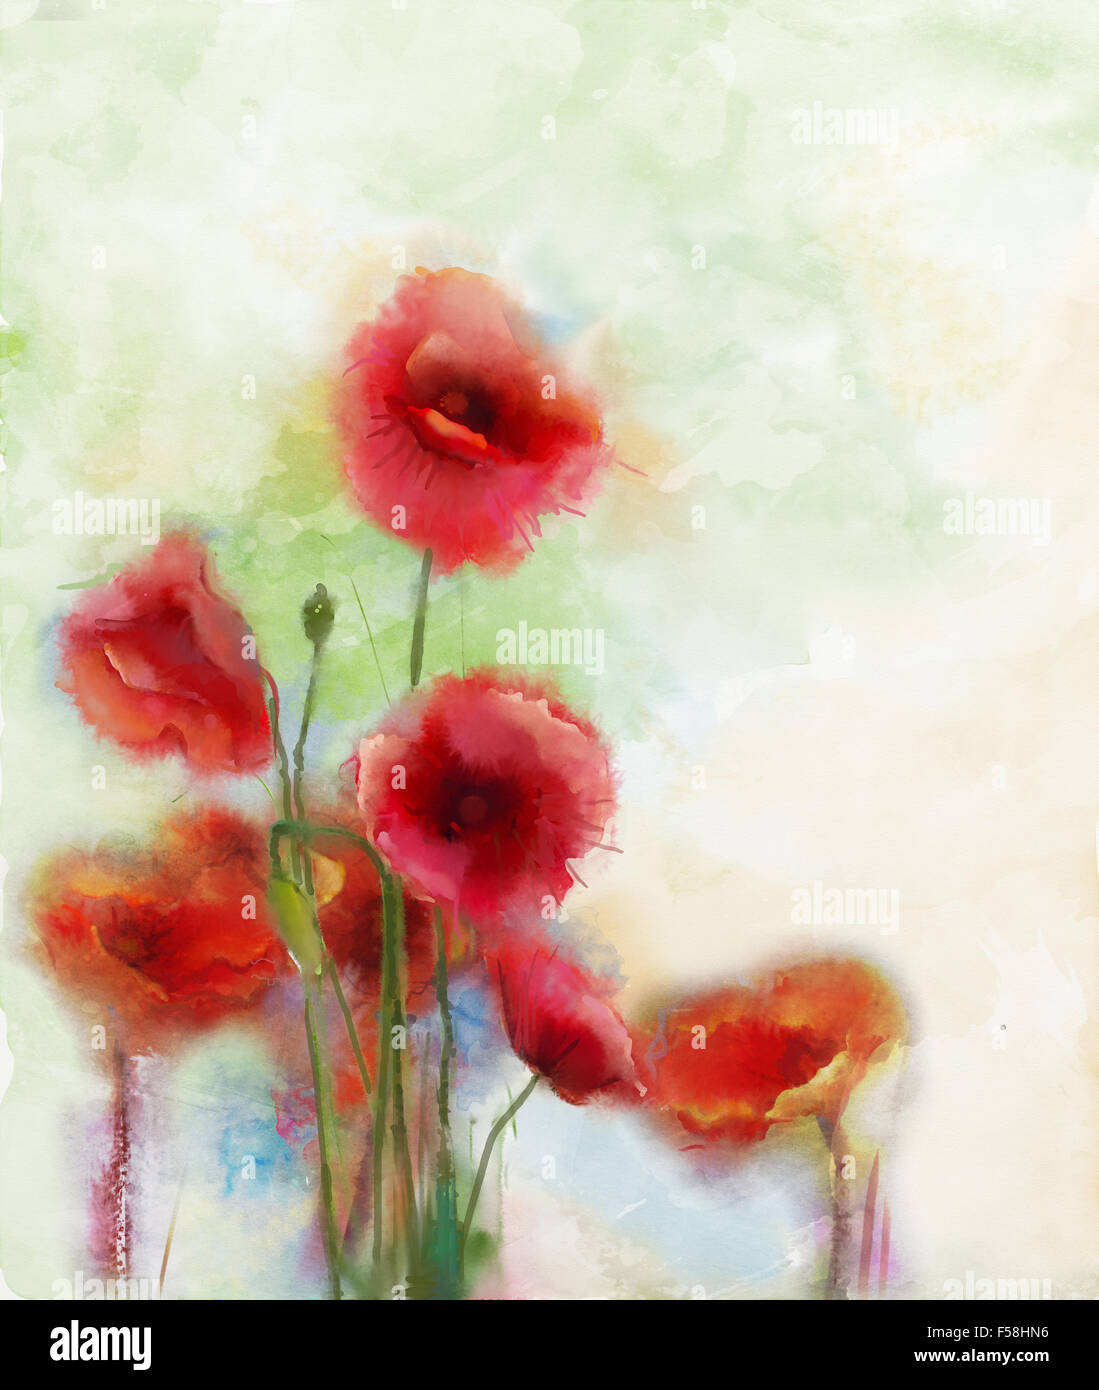 Watercolor flowers painting.Flowers in soft color and blur style for background.Vintage painting flowers Stock Photo